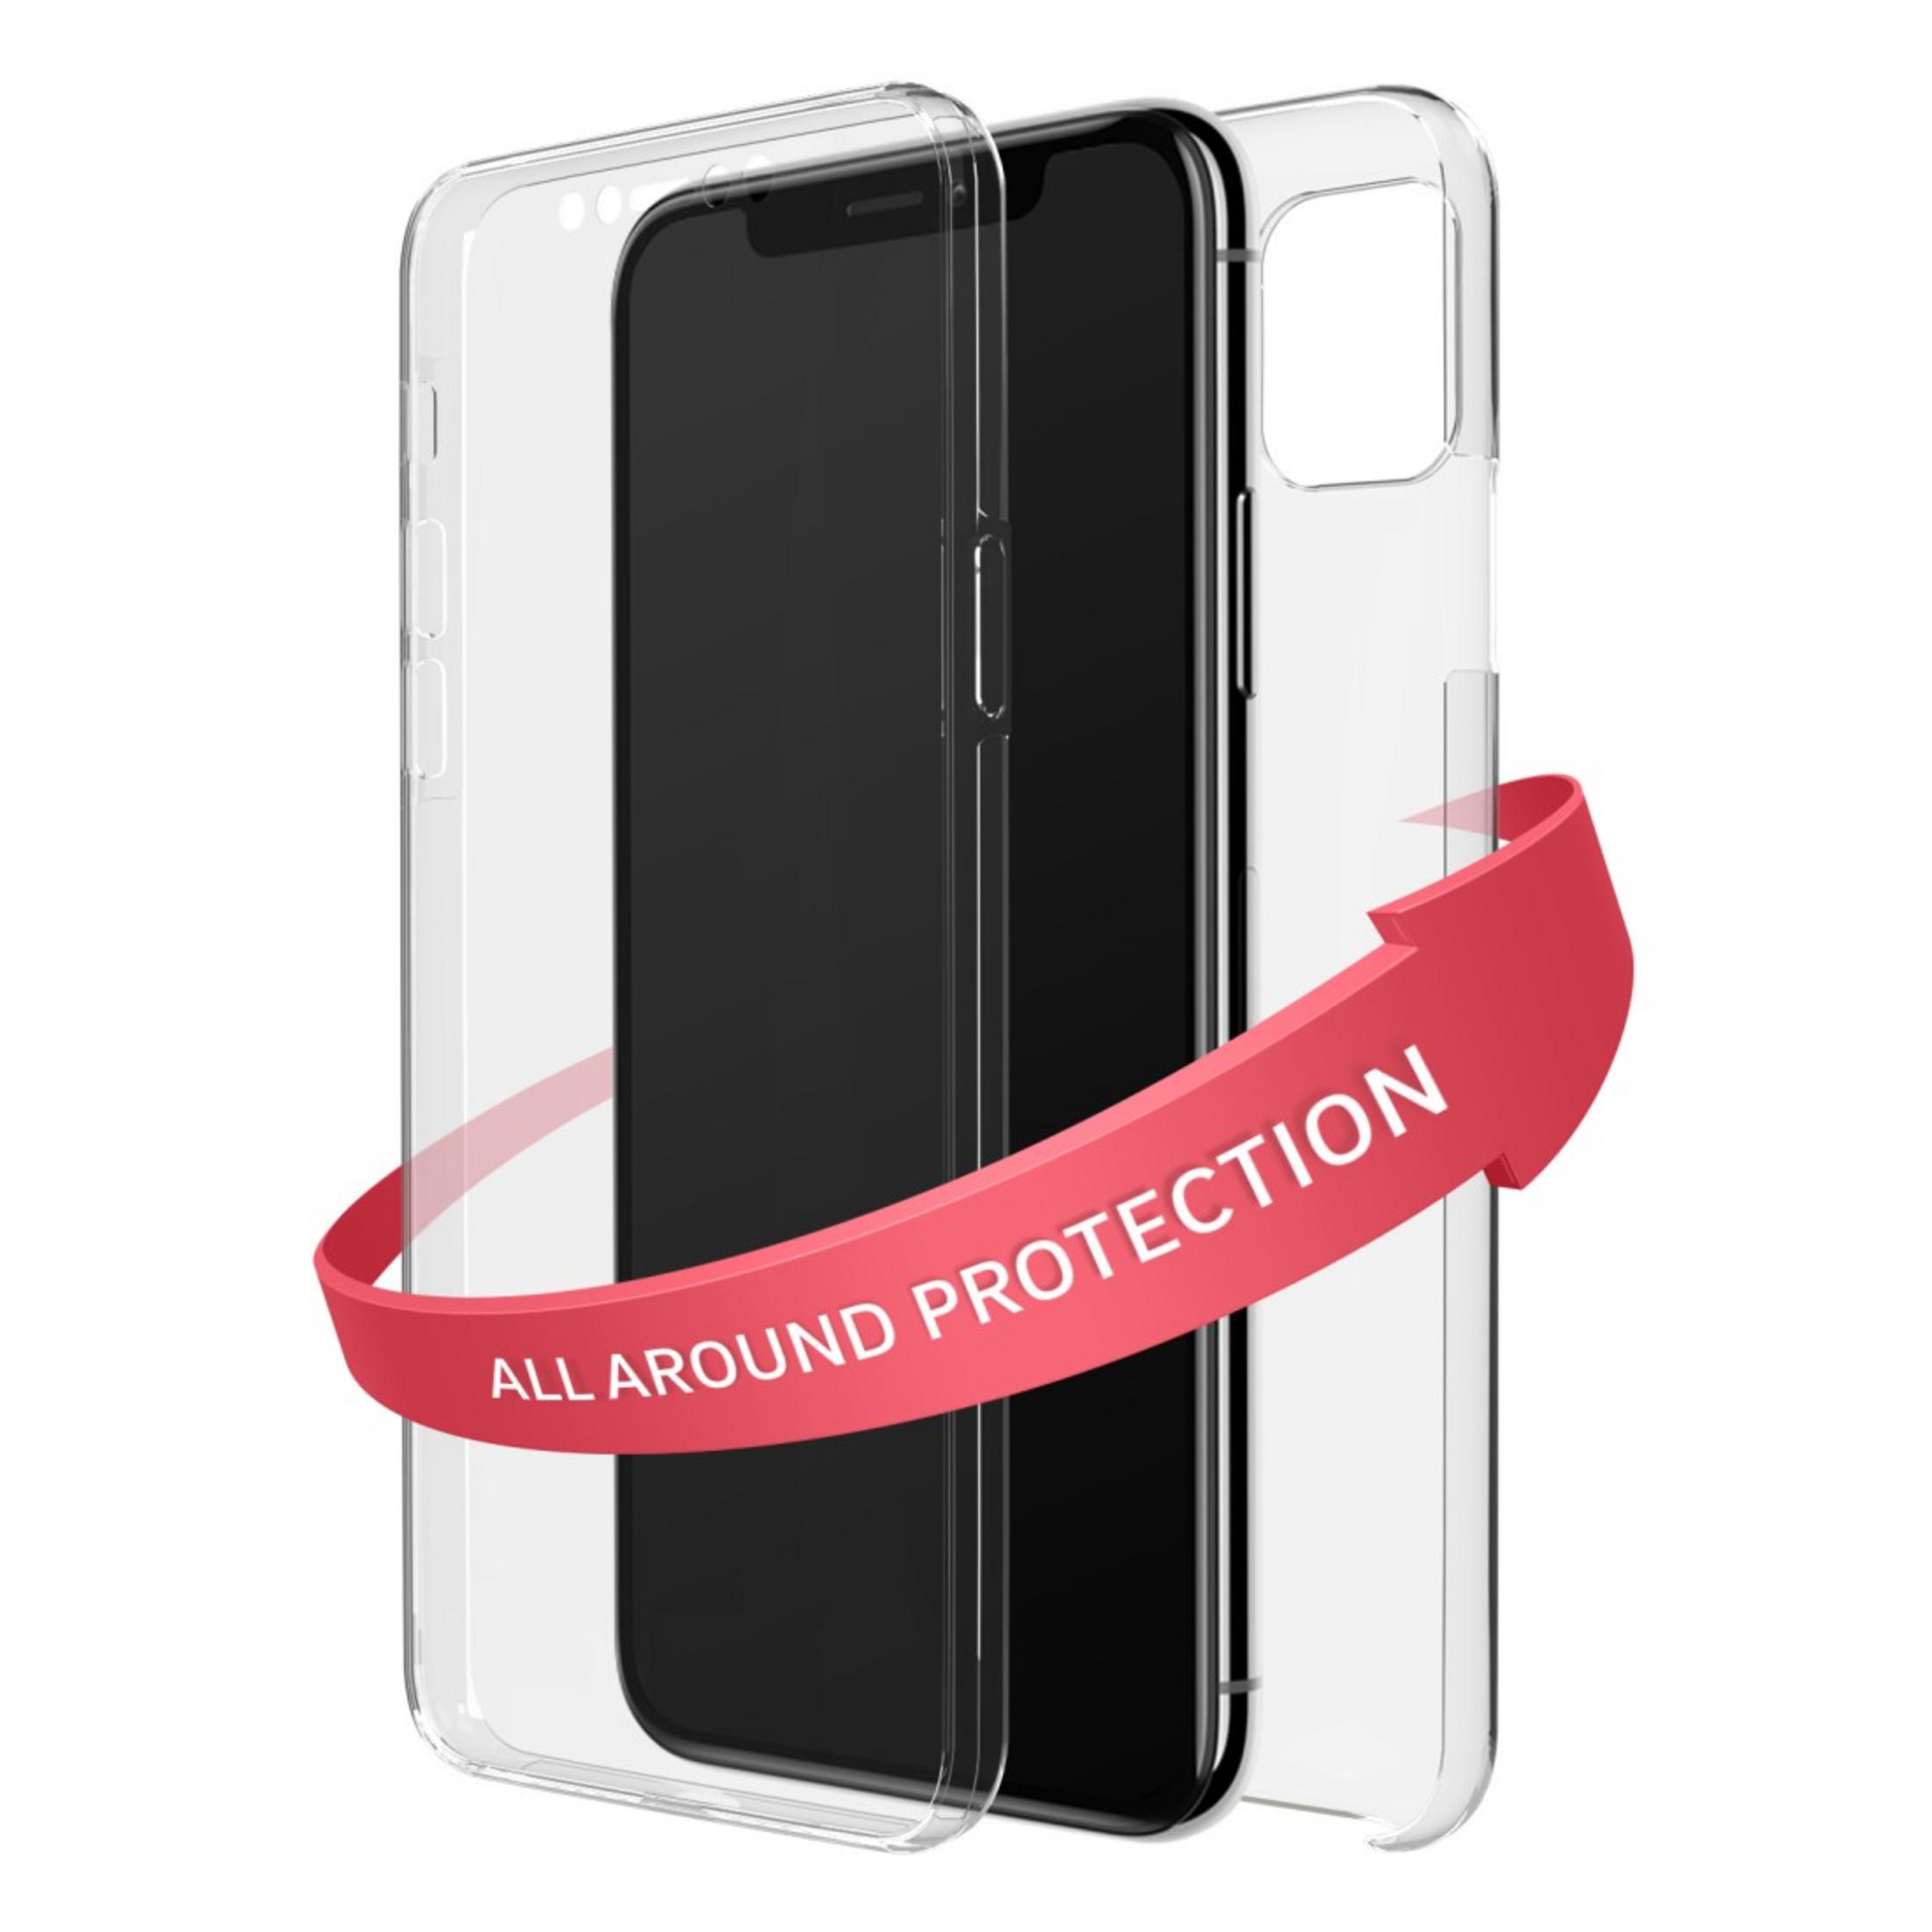 Pro 360° 187025 PRO, Cover, 11 iPhone 11 BLACK ROCK CLEAR Full Max, Transparent IPHONE Apple, CO